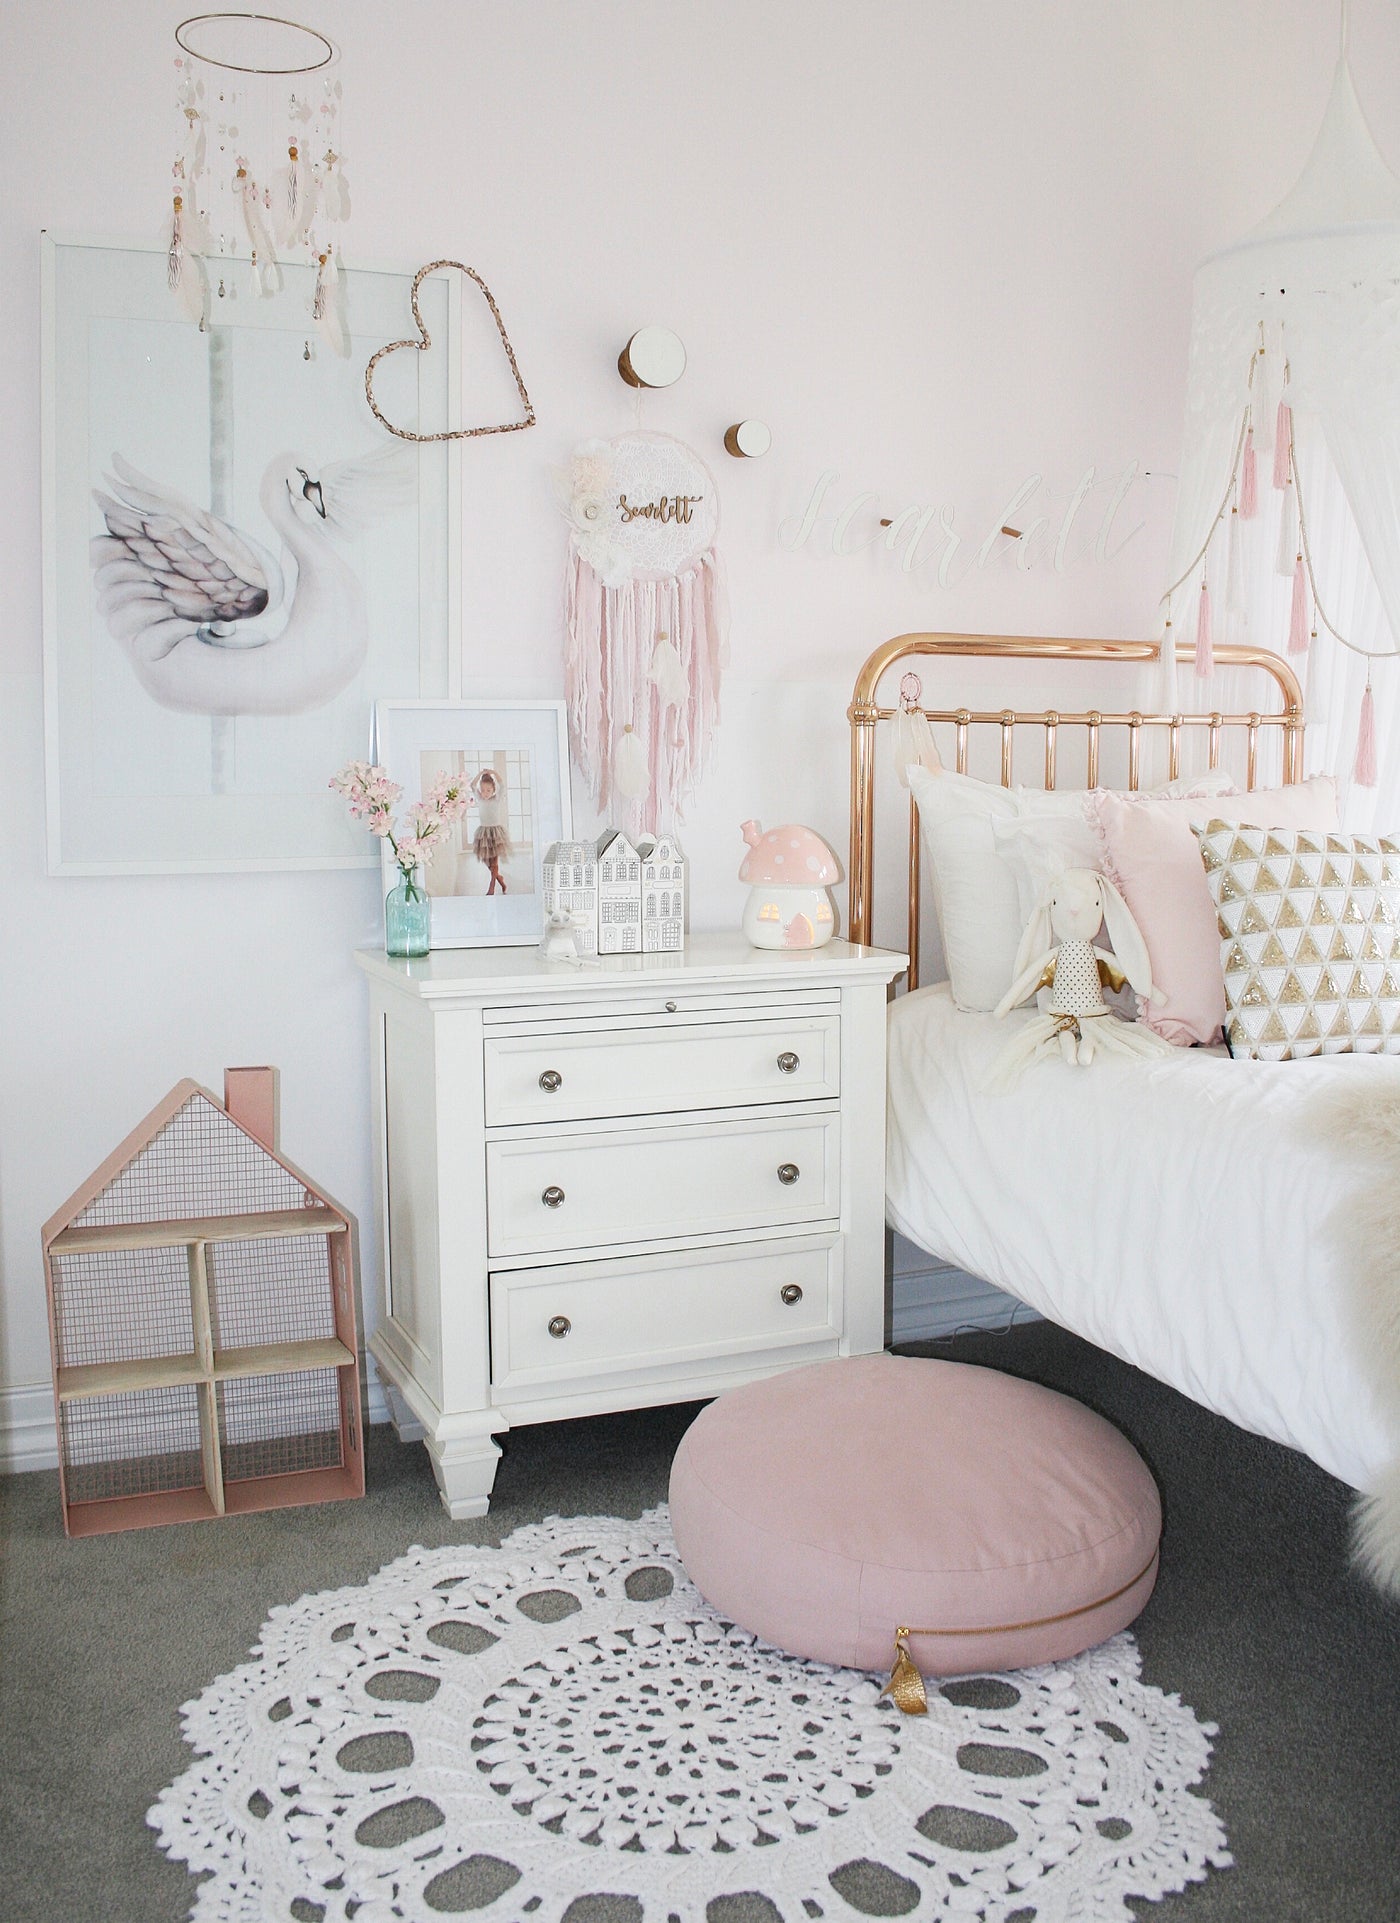 Ethereal & Soft - the bedroom love project Jacci Kelly undertook to calm her daughters heart.